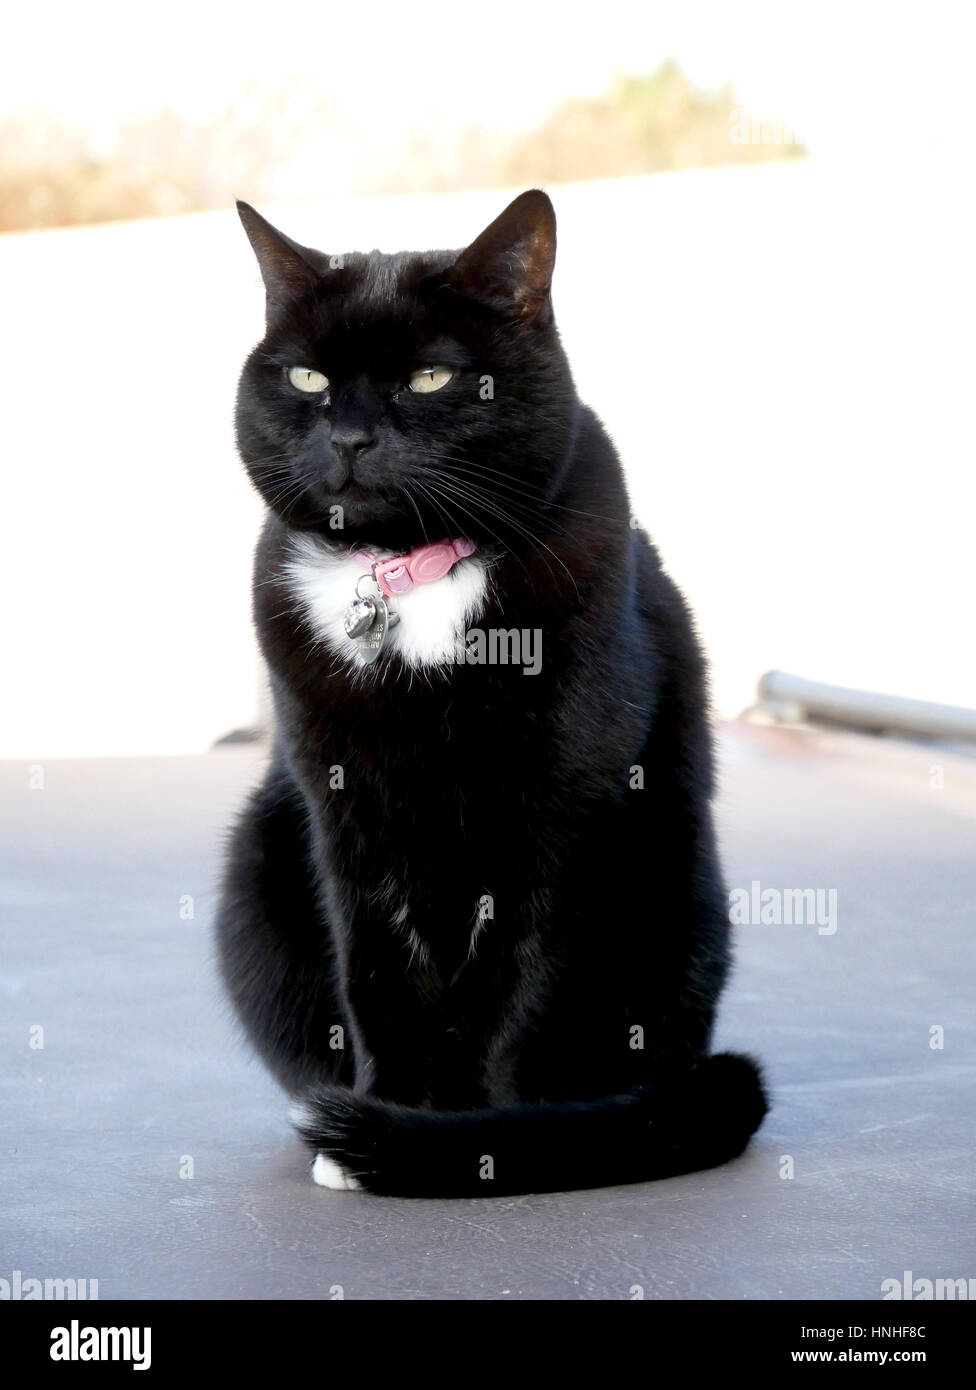 A black cat with a pink collar sitting down. Stock Photo